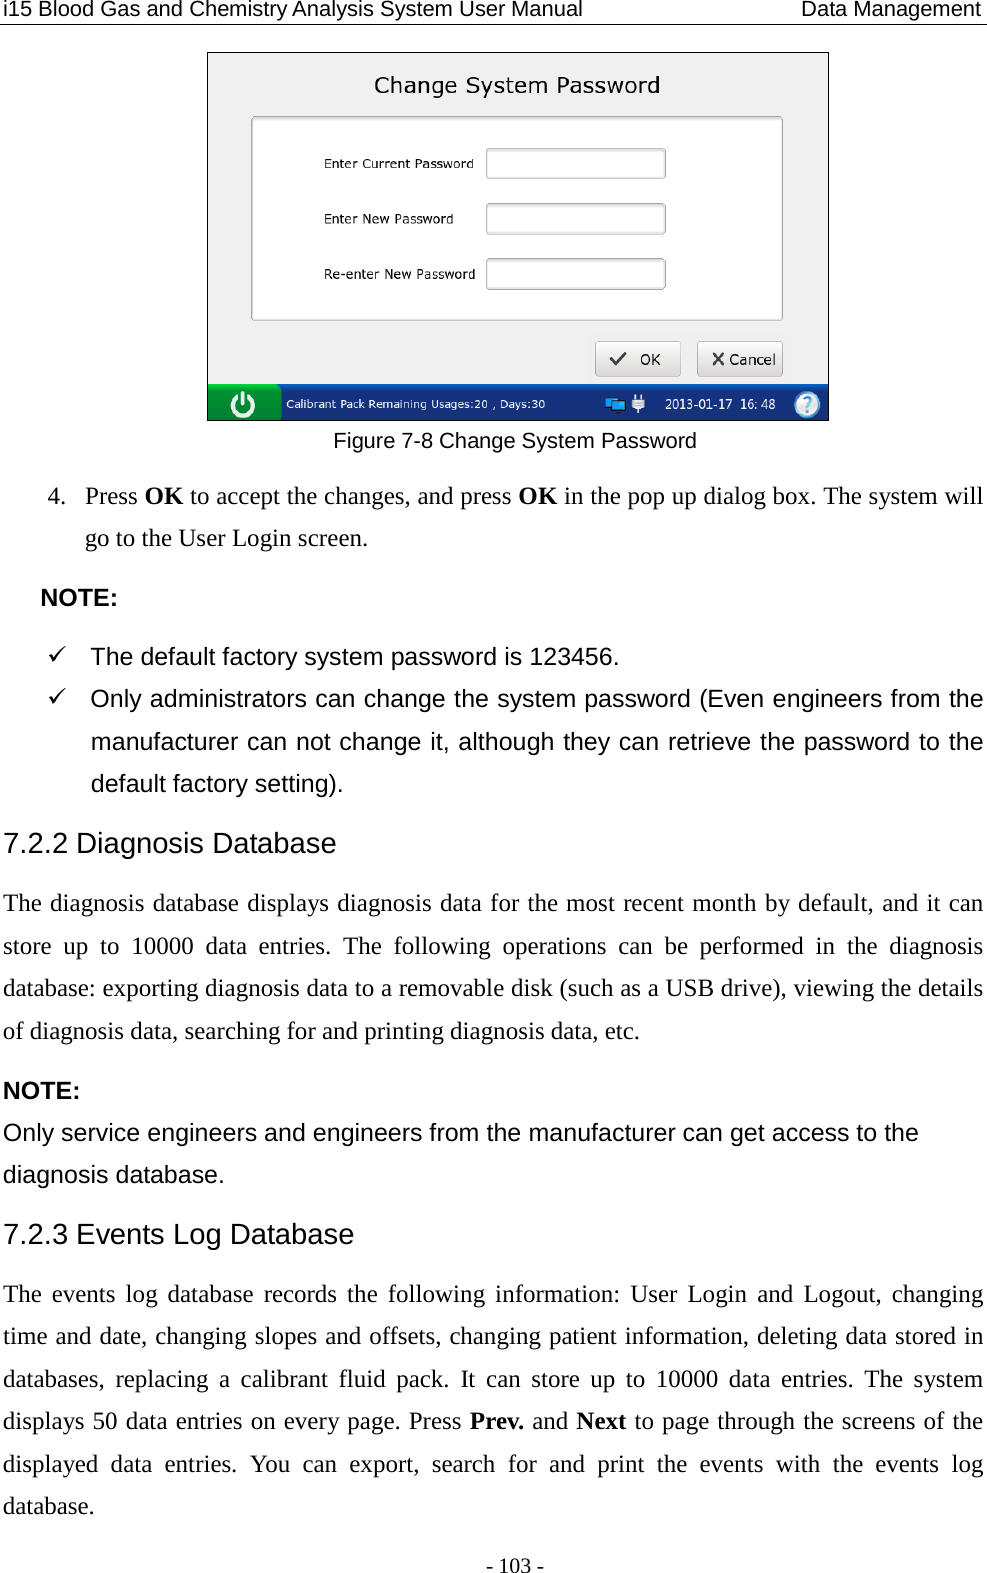 i15 Blood Gas and Chemistry Analysis System User Manual                    Data Management - 103 -  Figure 7-8 Change System Password 4. Press OK to accept the changes, and press OK in the pop up dialog box. The system will go to the User Login screen. NOTE:  The default factory system password is 123456.  Only administrators can change the system password (Even engineers from the manufacturer can not change it, although they can retrieve the password to the default factory setting). 7.2.2 Diagnosis Database The diagnosis database displays diagnosis data for the most recent month by default, and it can store up to 10000  data entries.  The following operations can be performed in  the diagnosis database: exporting diagnosis data to a removable disk (such as a USB drive), viewing the details of diagnosis data, searching for and printing diagnosis data, etc. NOTE: Only service engineers and engineers from the manufacturer can get access to the diagnosis database. 7.2.3 Events Log Database The events log database records the following information: User  Login and Logout, changing time and date, changing slopes and offsets, changing patient information, deleting data stored in databases,  replacing a  calibrant fluid pack.  It can store up to 10000 data entries. The system displays 50 data entries on every page. Press Prev. and Next to page through the screens of the displayed  data entries.  You can export, search for and print the events with the events log database. 